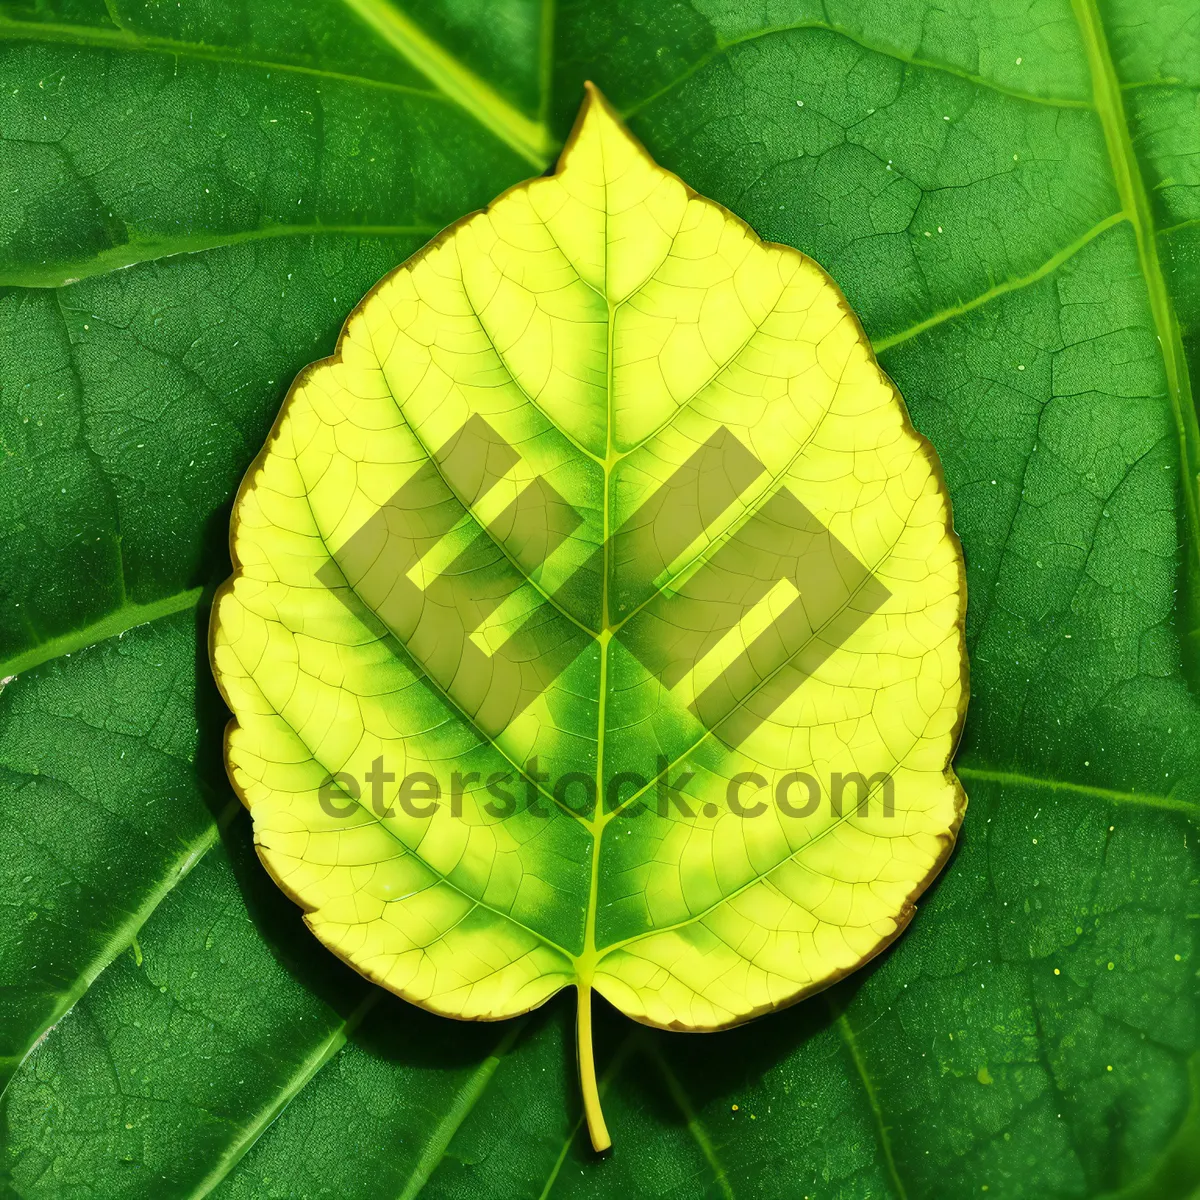 Picture of Bright Autumn Tree Leaf Closeup with Organic Texture